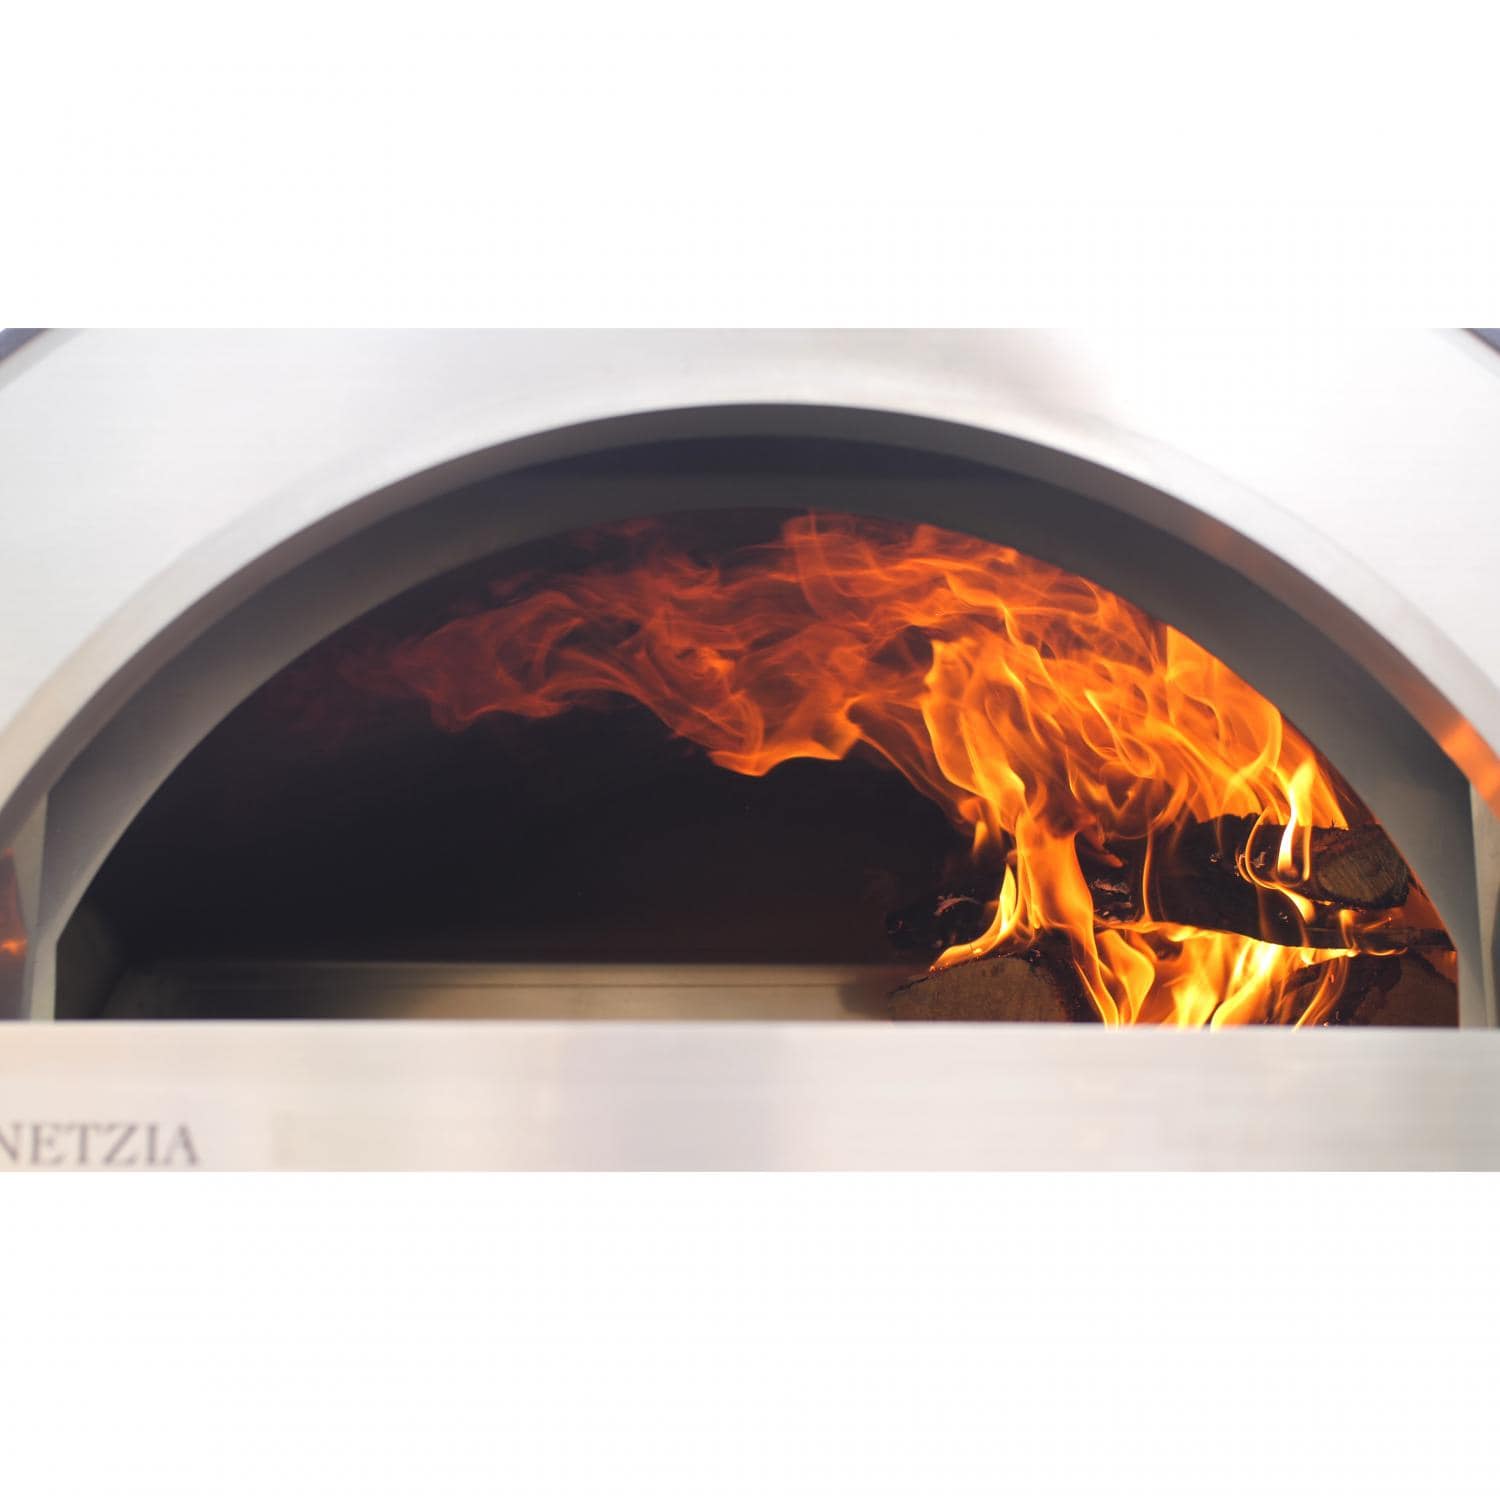 Forno Venetzia Bellagio 300 44-Inch Outdoor Wood-Fired Pizza Oven - Red - image 5 of 6